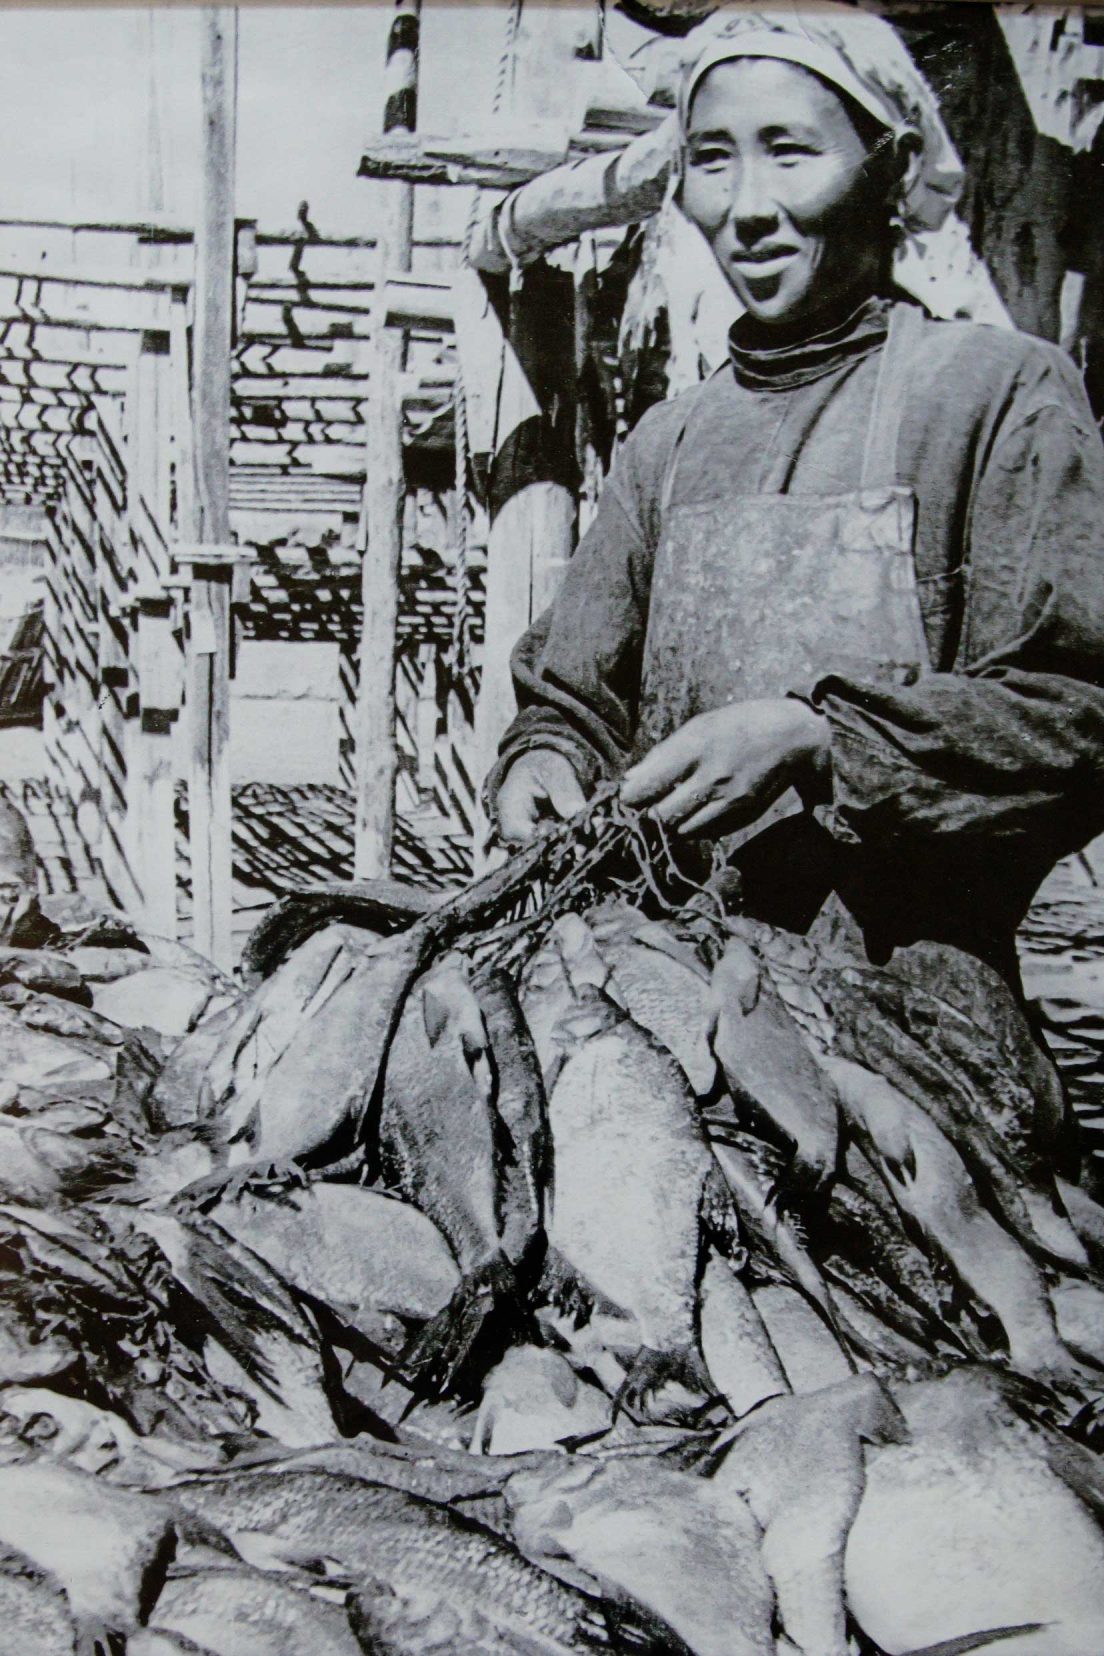 Worker at the local fish factory